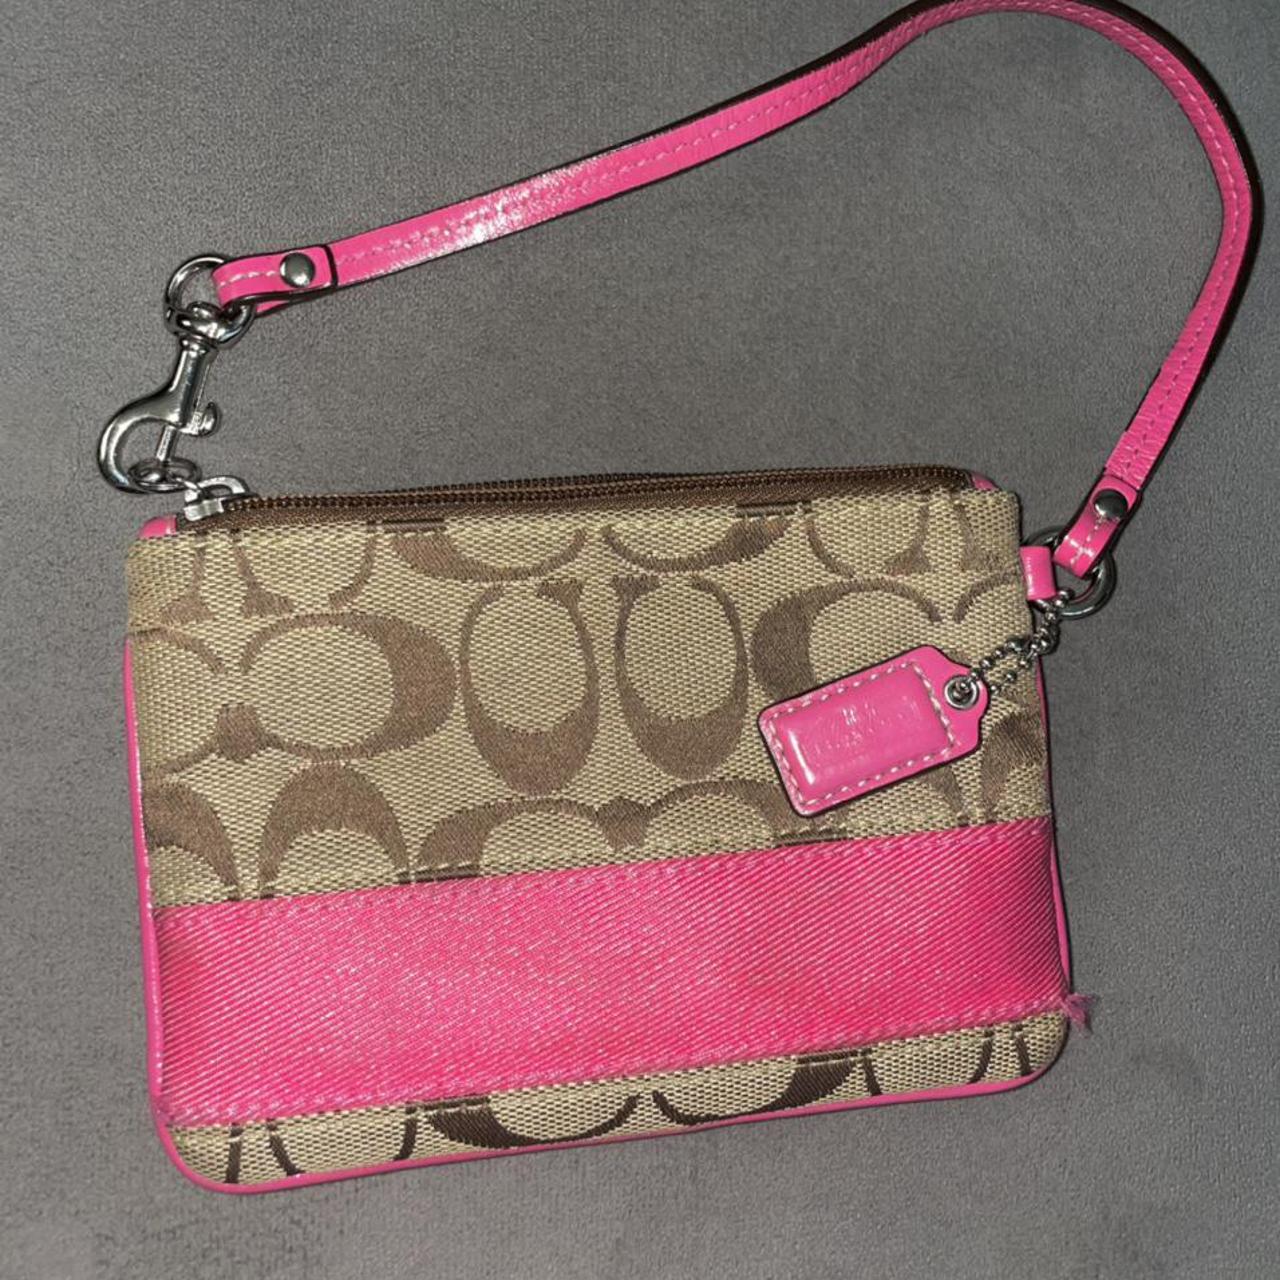 Coach, Bags, Vintage Hot Pink Coach Small Purse